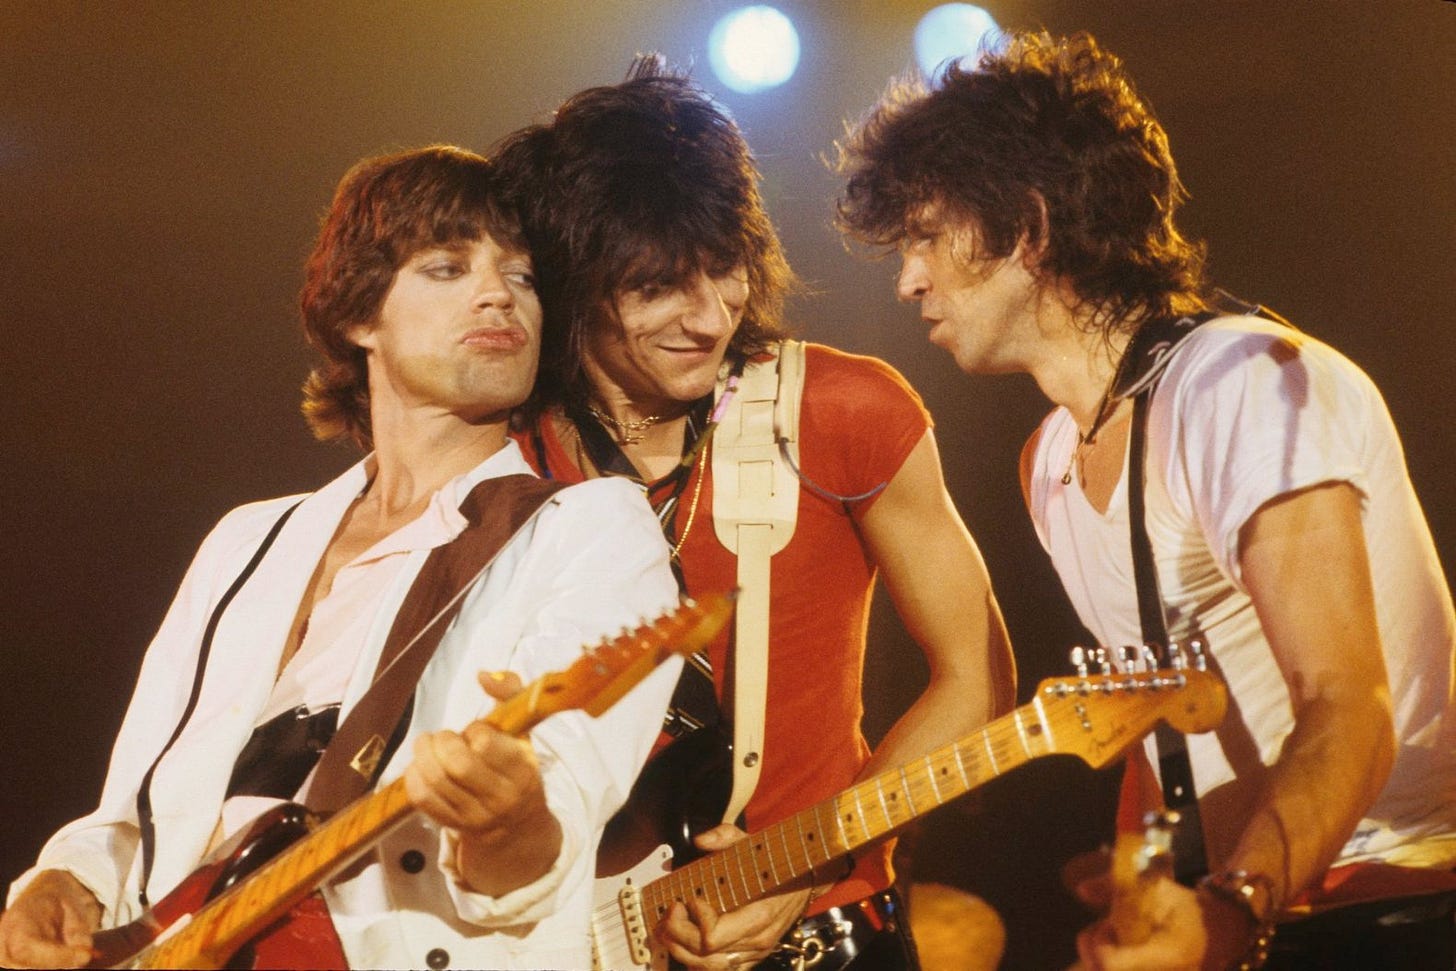 Revisit The Rolling Stones Infamous 1972 U.S. Tour on New Podcast